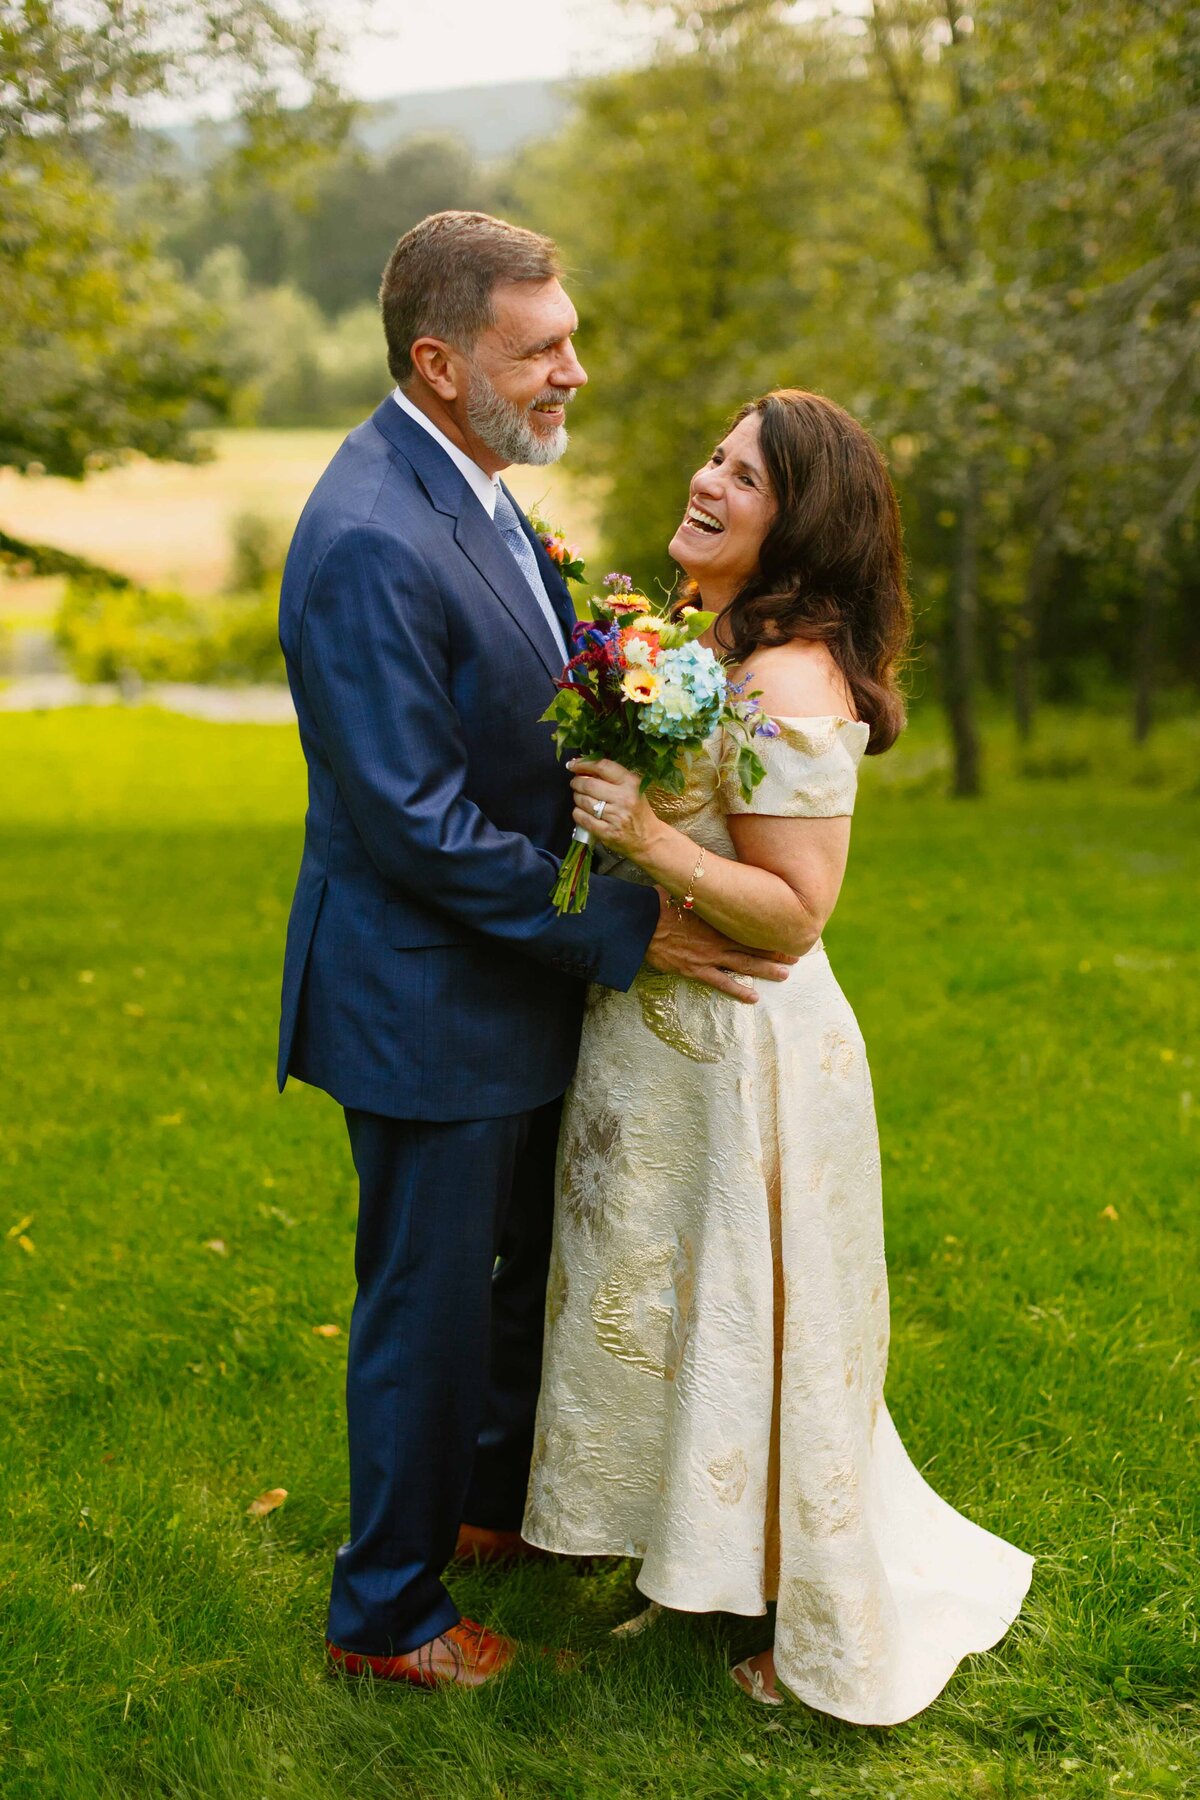 candid wedding portrait of a bride and groom in henniker new hampshire